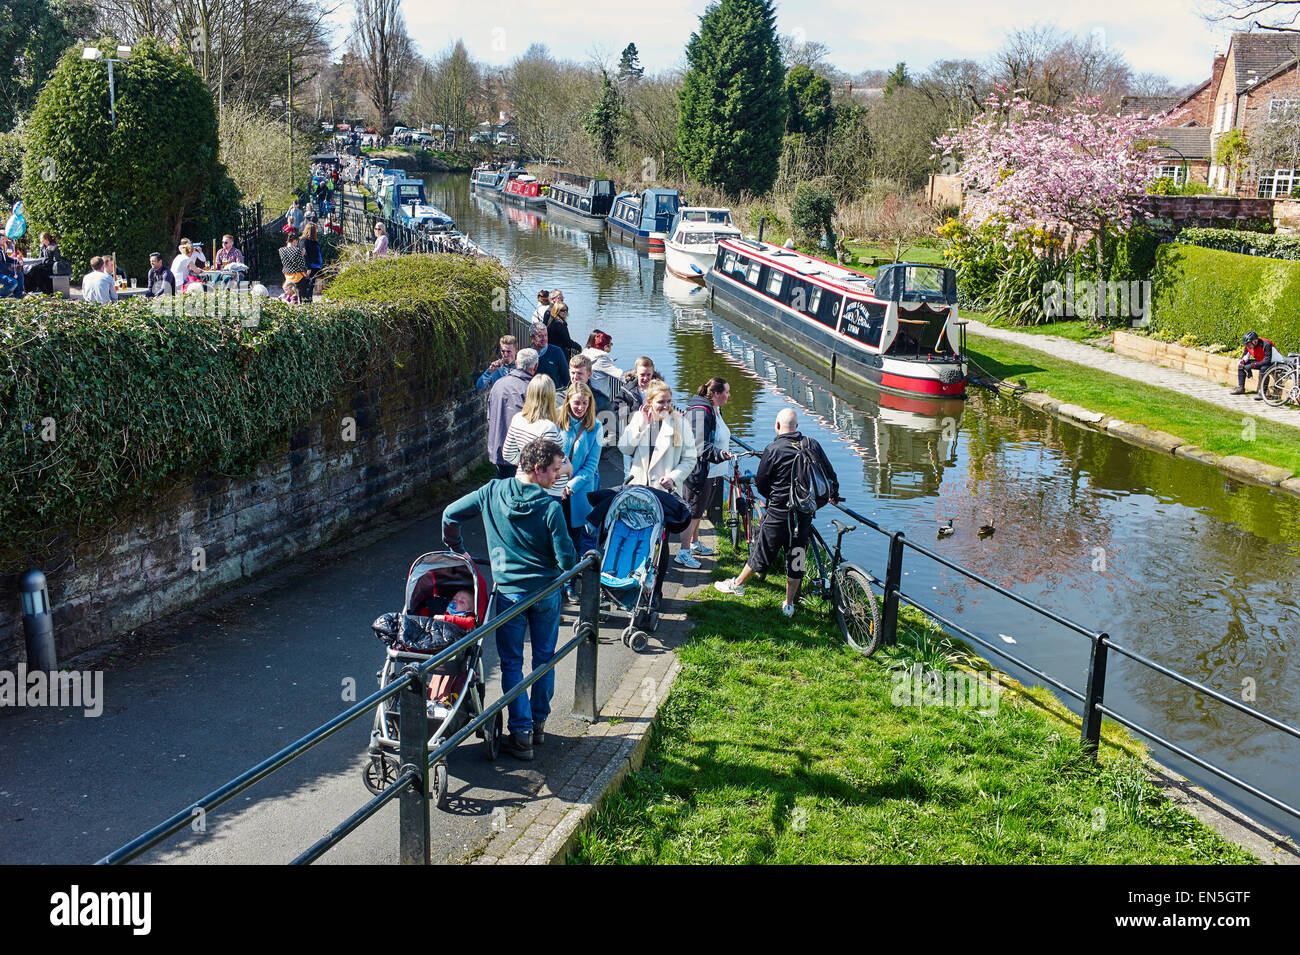 Lymm, Cheshire busy canalside at weekend Stock Photo